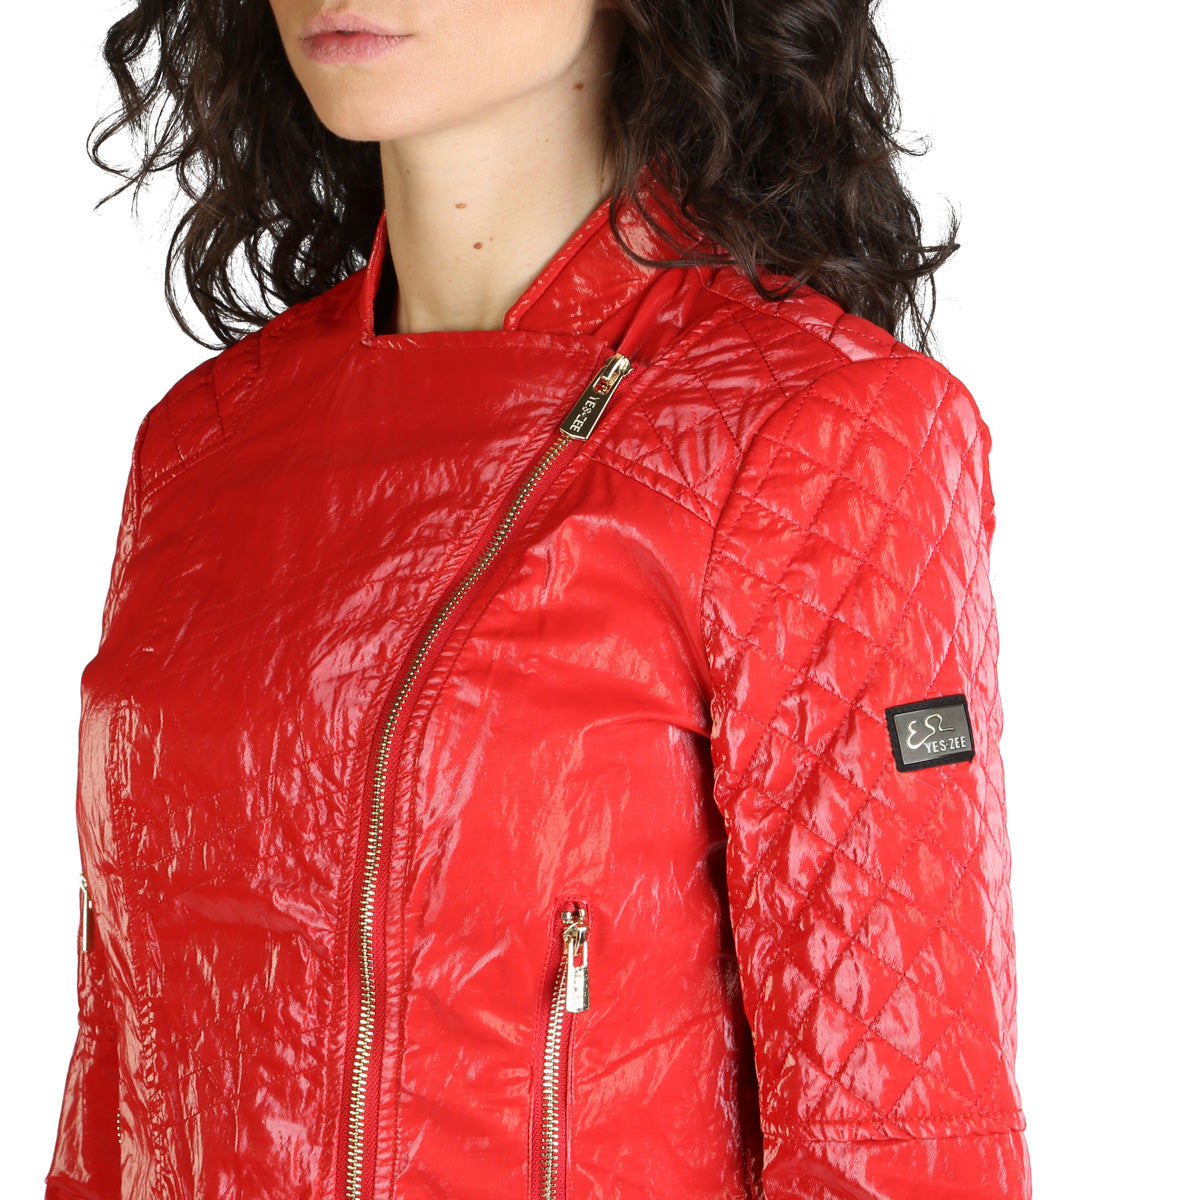 Red Polyester Jackets & Coat